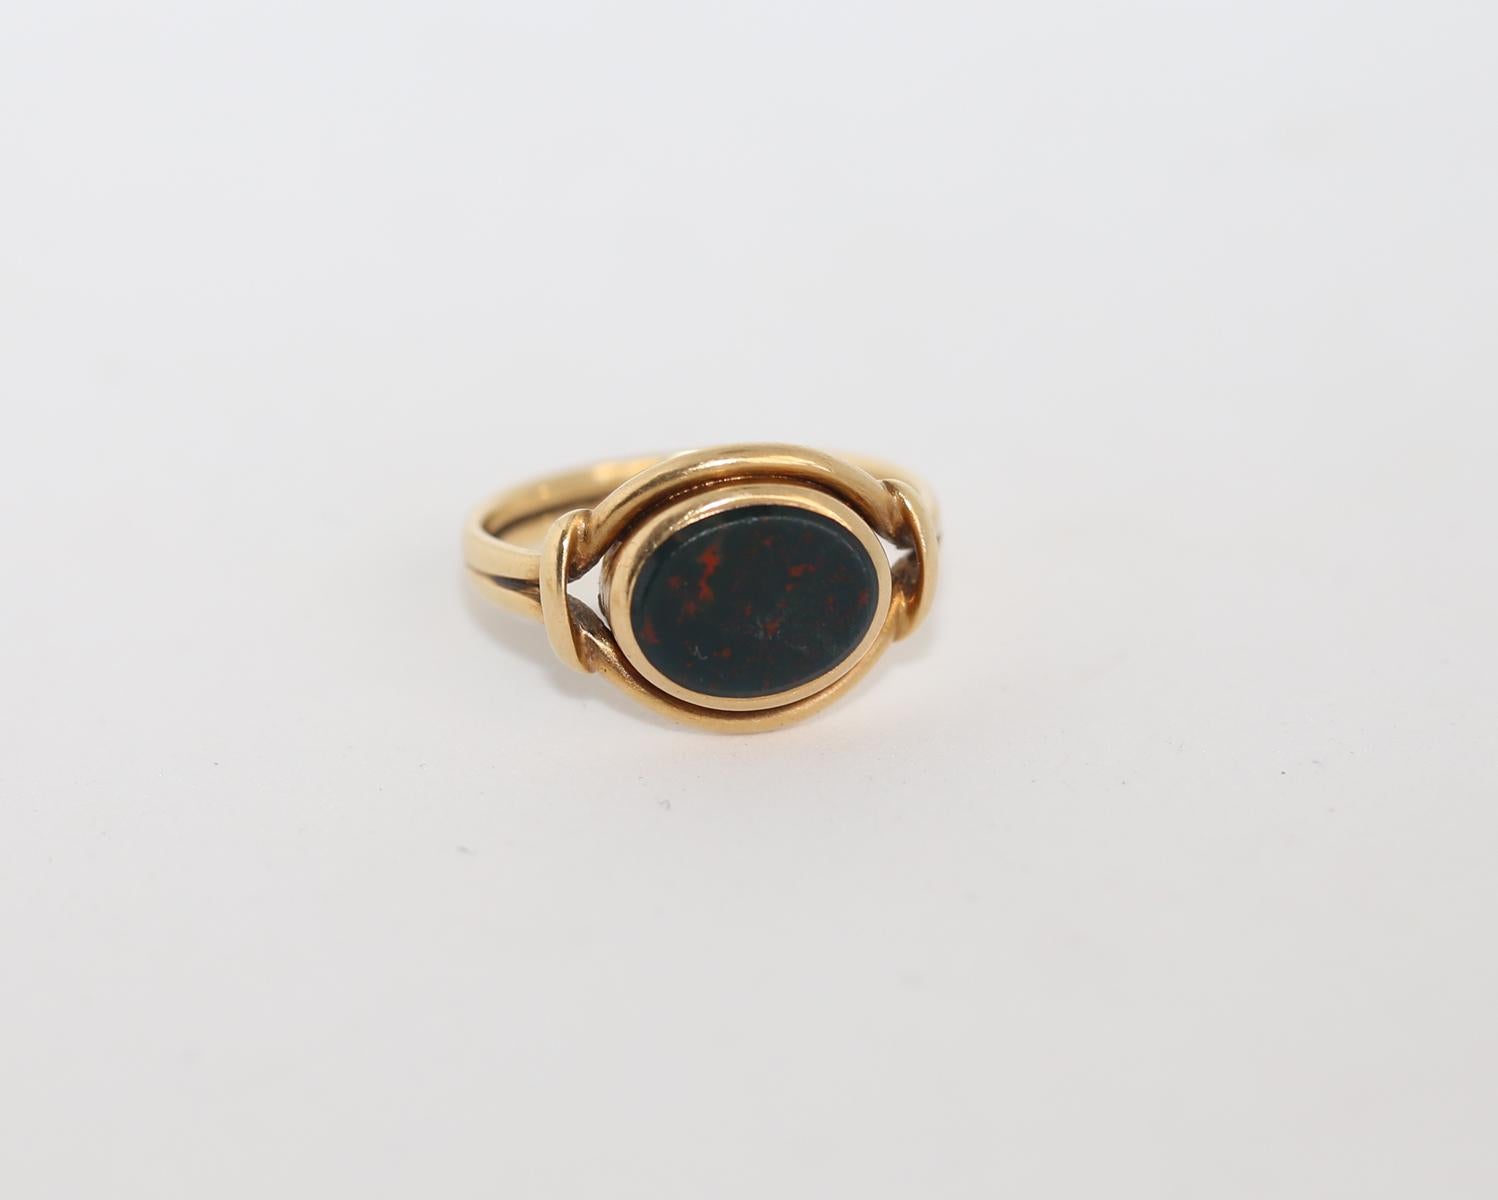 Fine antique signet ring which still waits for its signature to be carved. It is a unique opportunity to have an original antique ring but have your personal initials added to it. It is beautiful as is too and can be worn without any signature